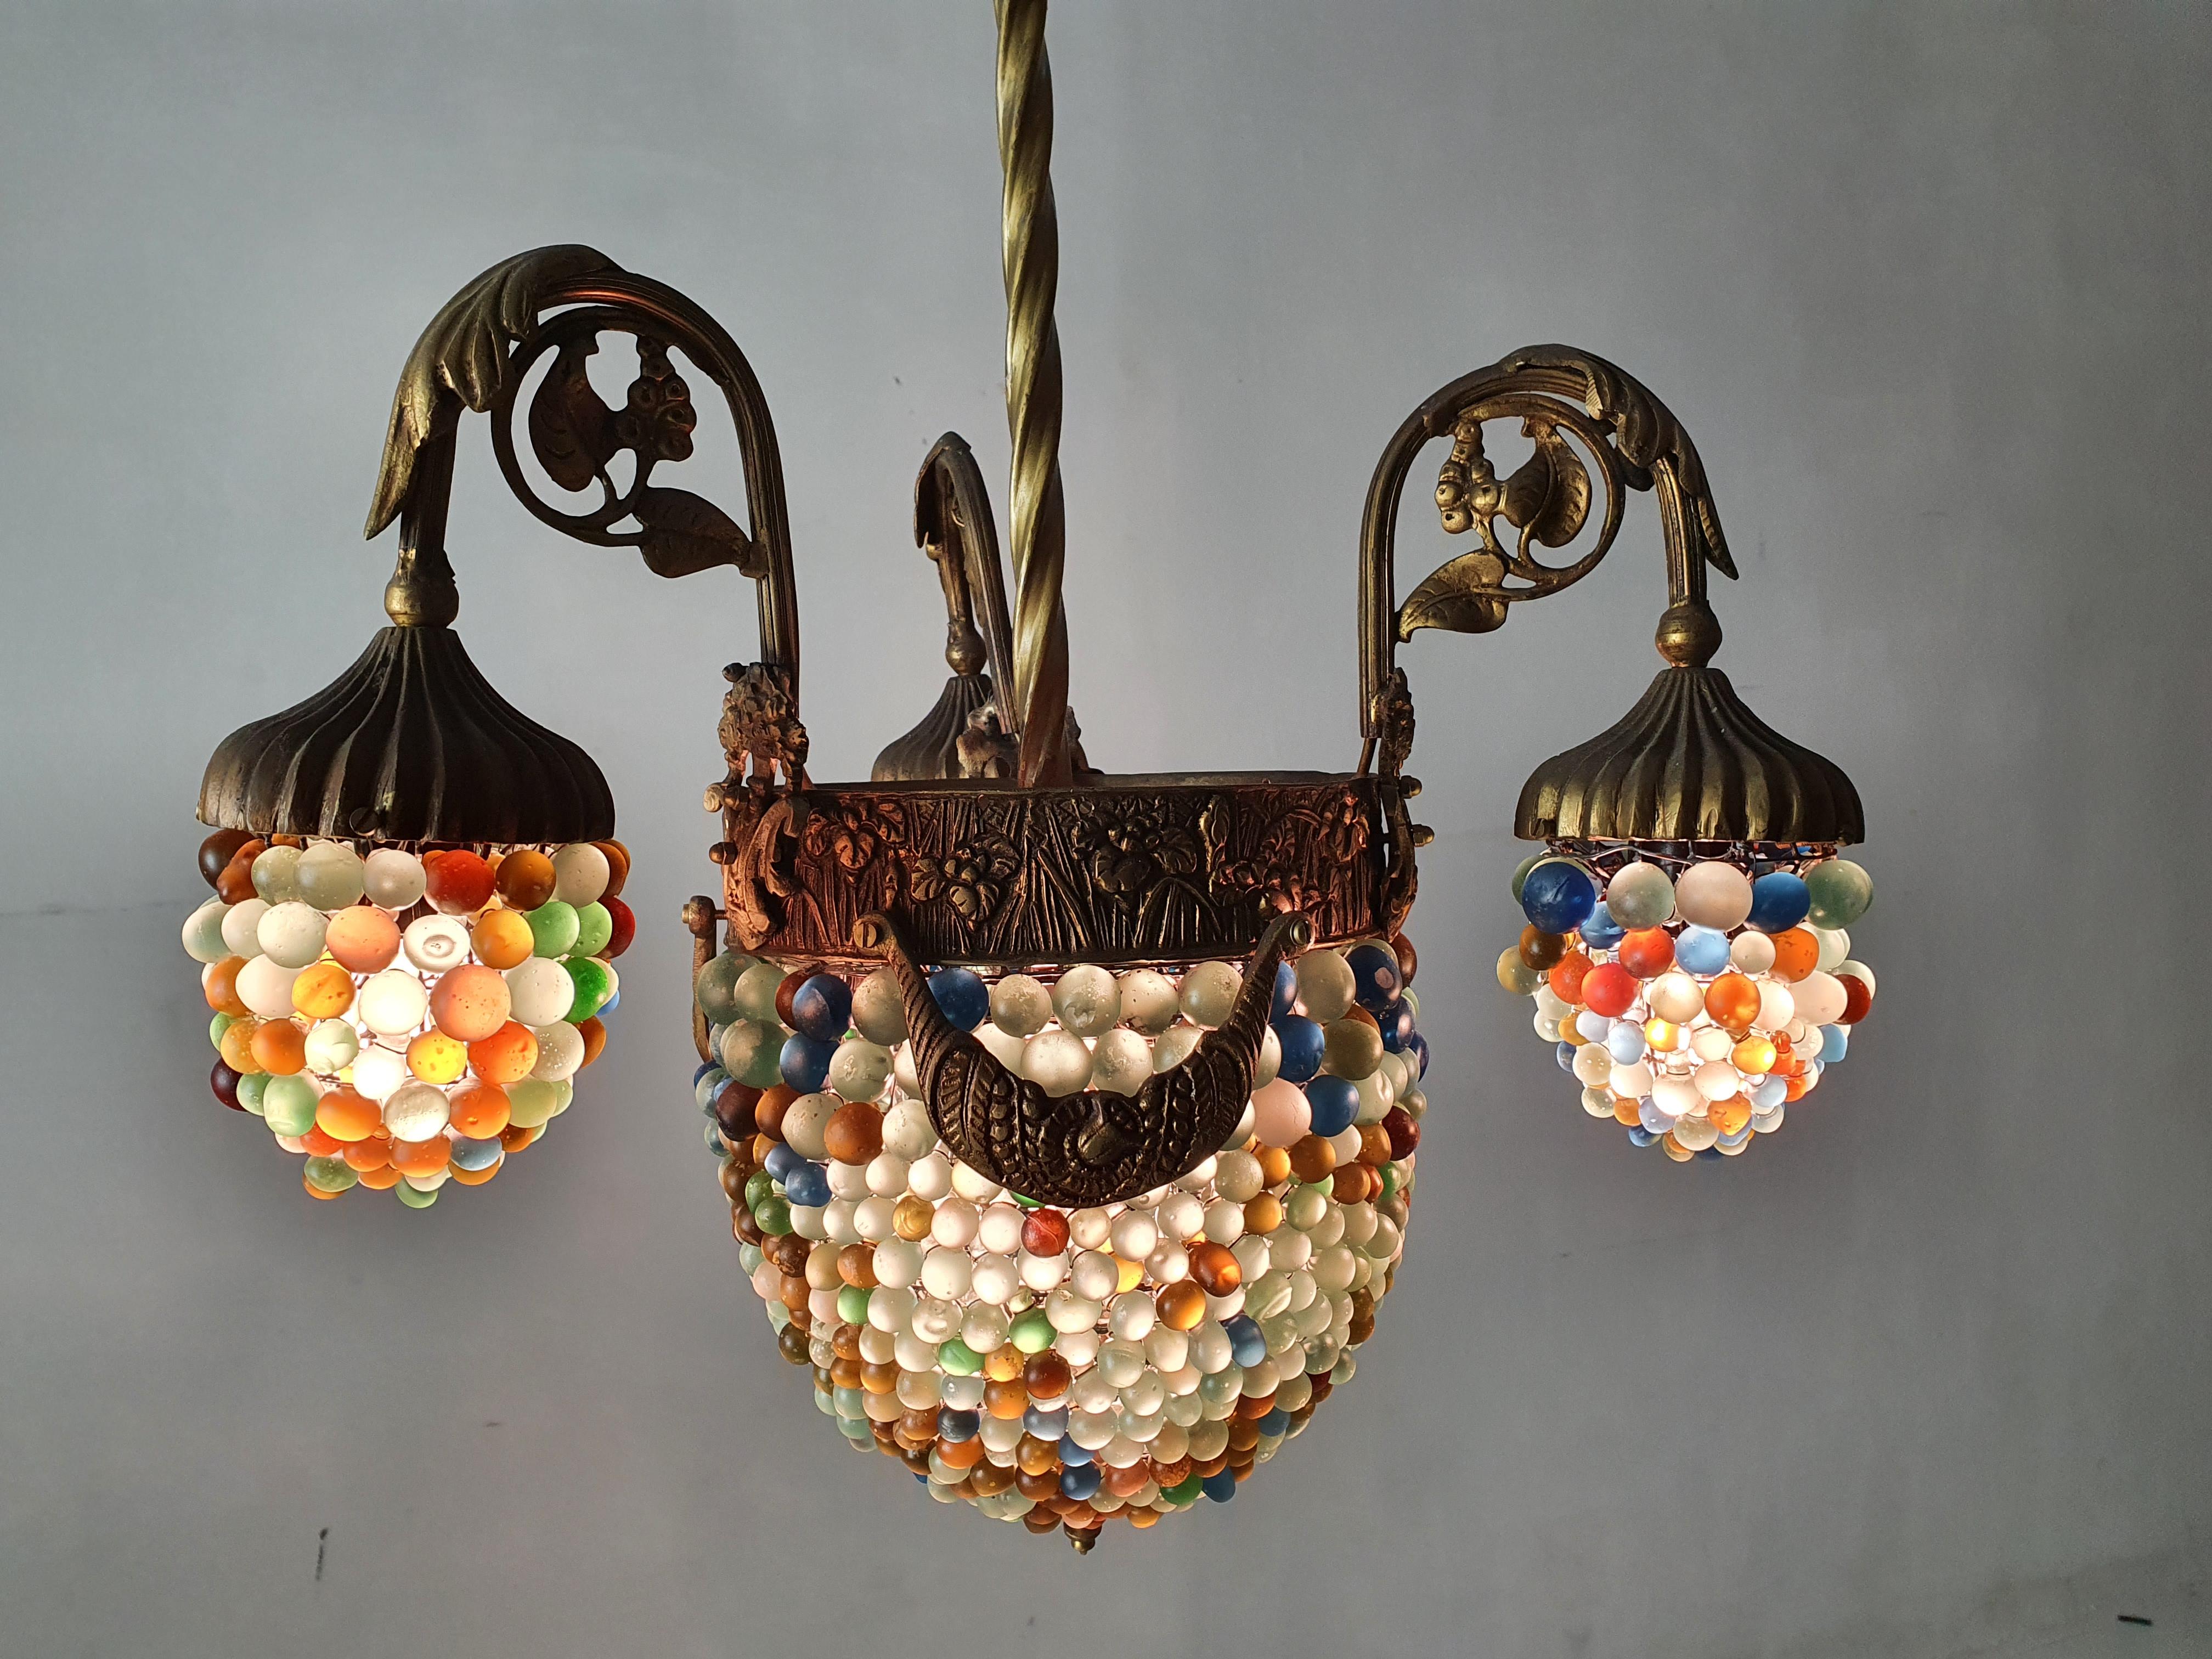 A chandelier in Art Noveau style made with a structure in bronze and adorned with an array of different colored solid glass beads. The arms and centre has a decor of different flowers and leaves and the lampshades are of handmade glass beads. The